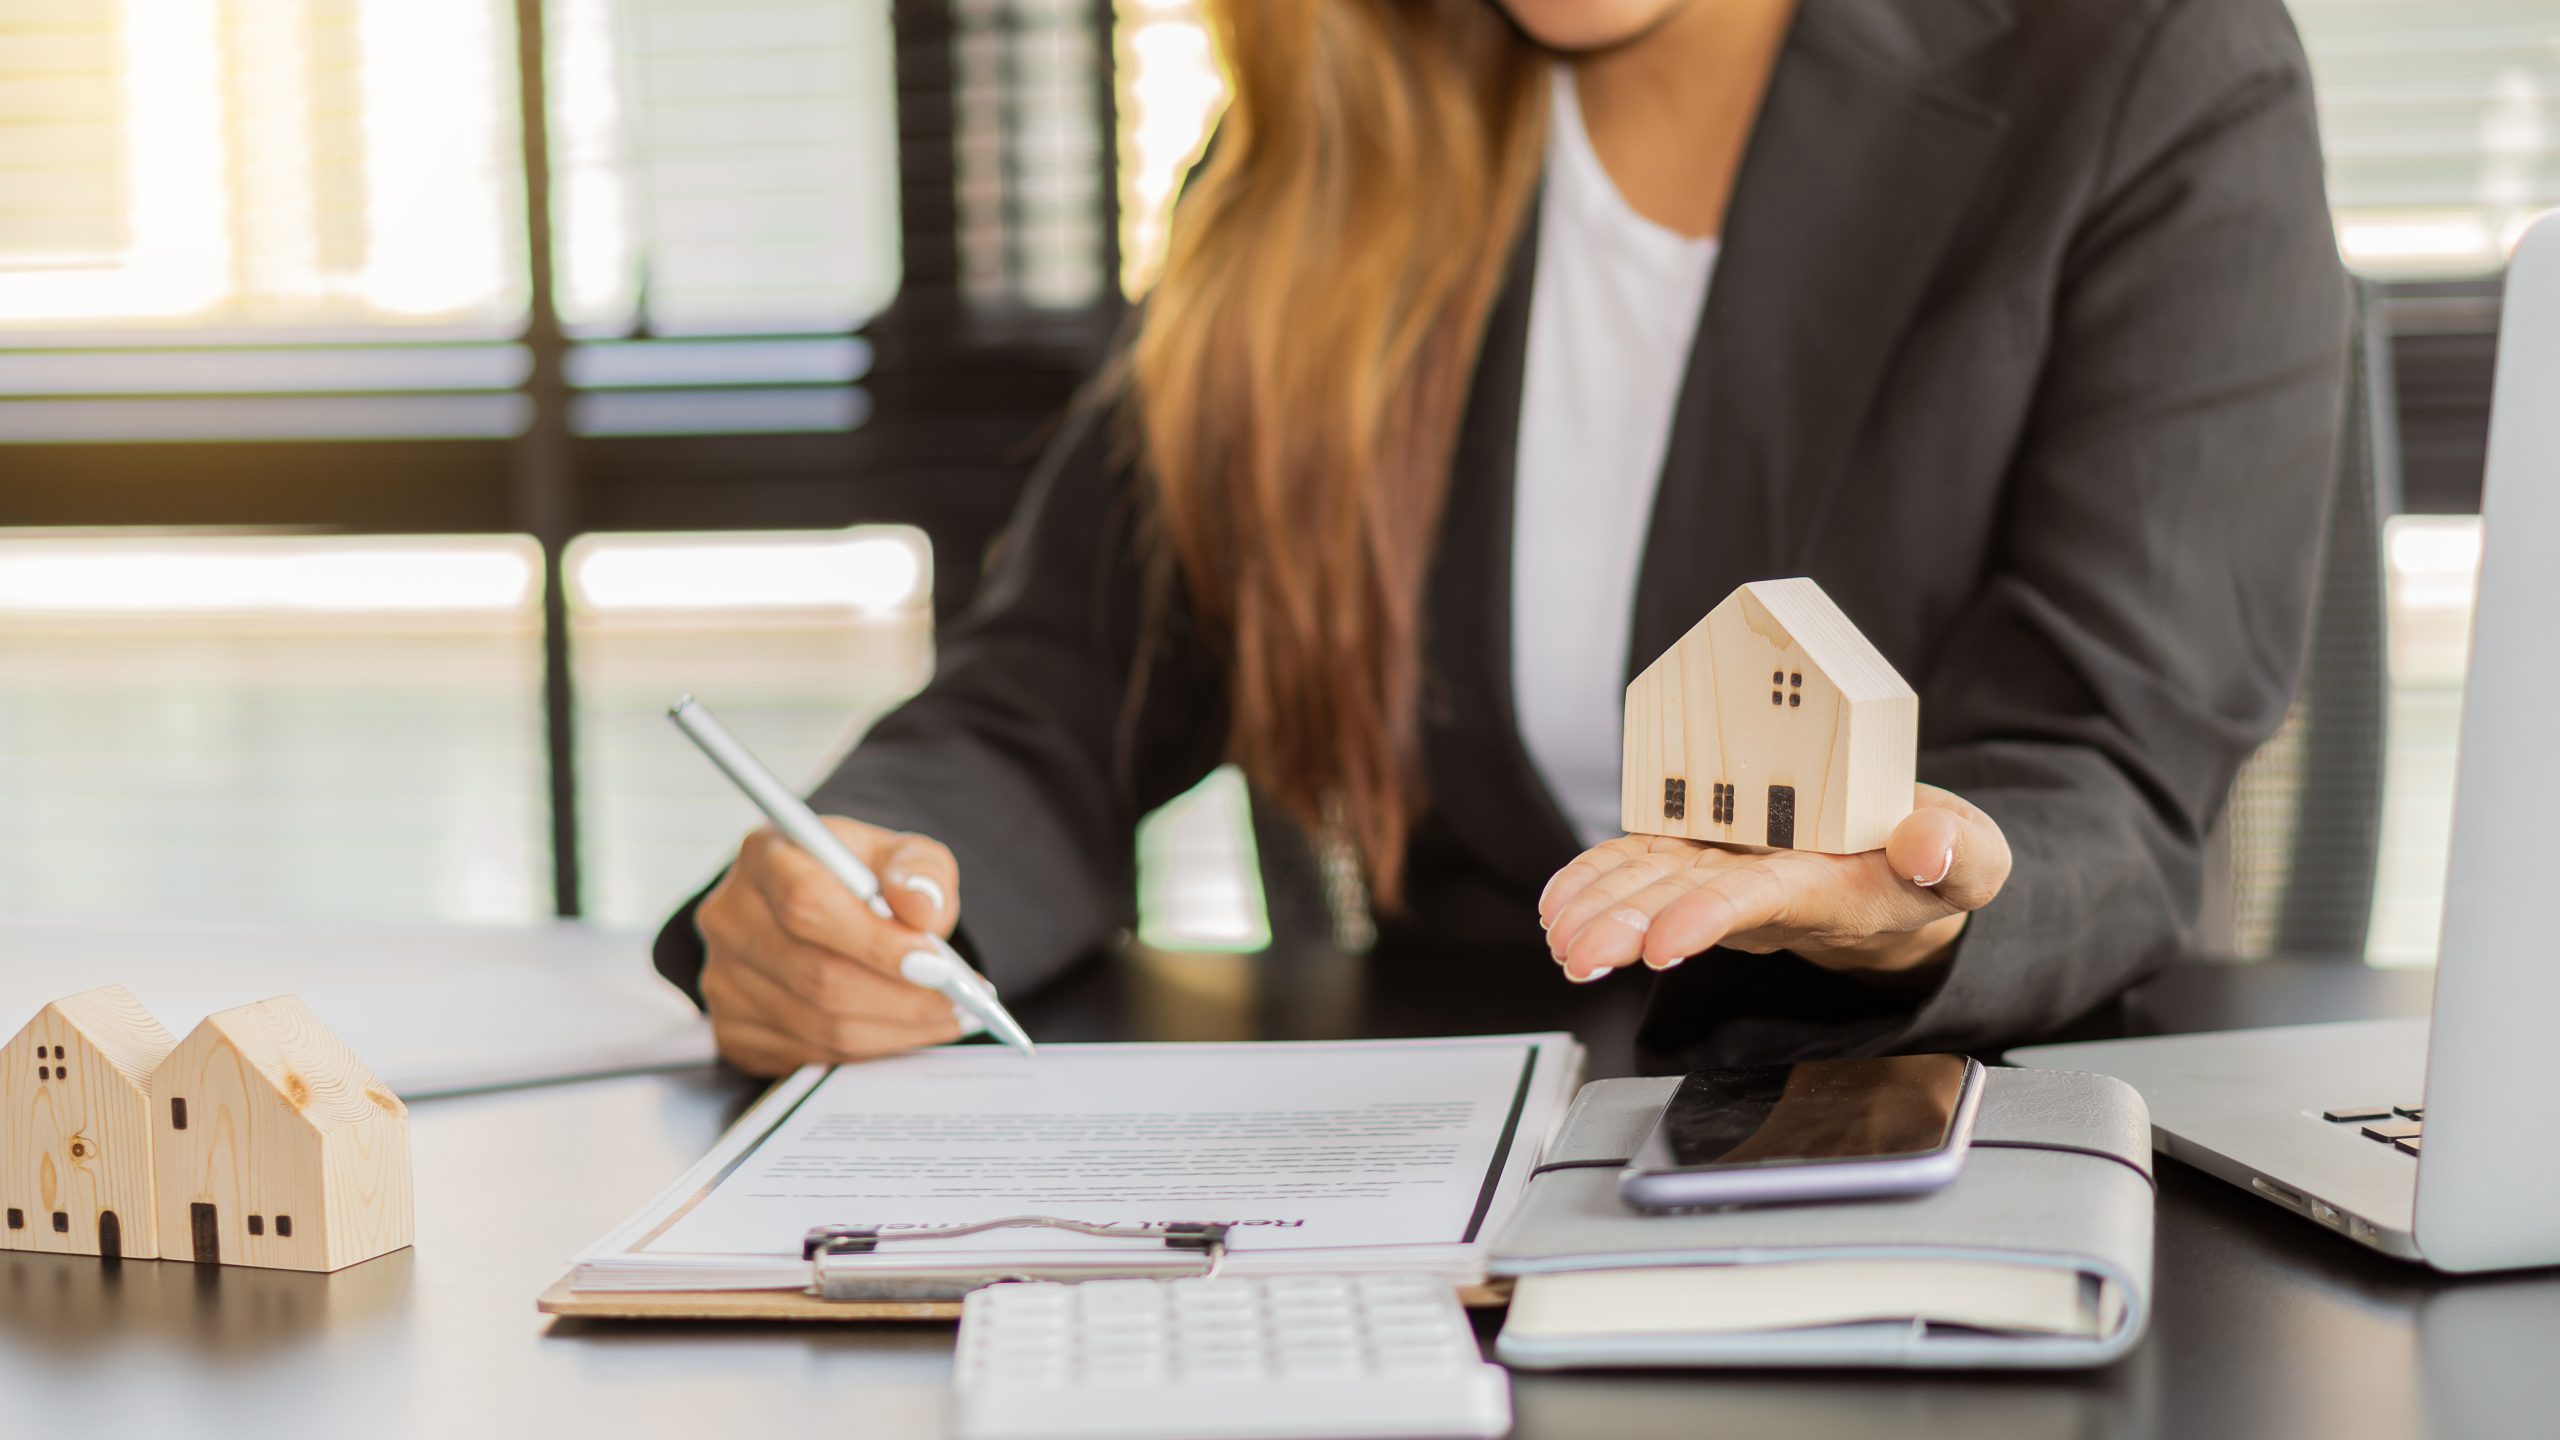 First Time Home-buyers: How to Properly Research Your Mortgage Options